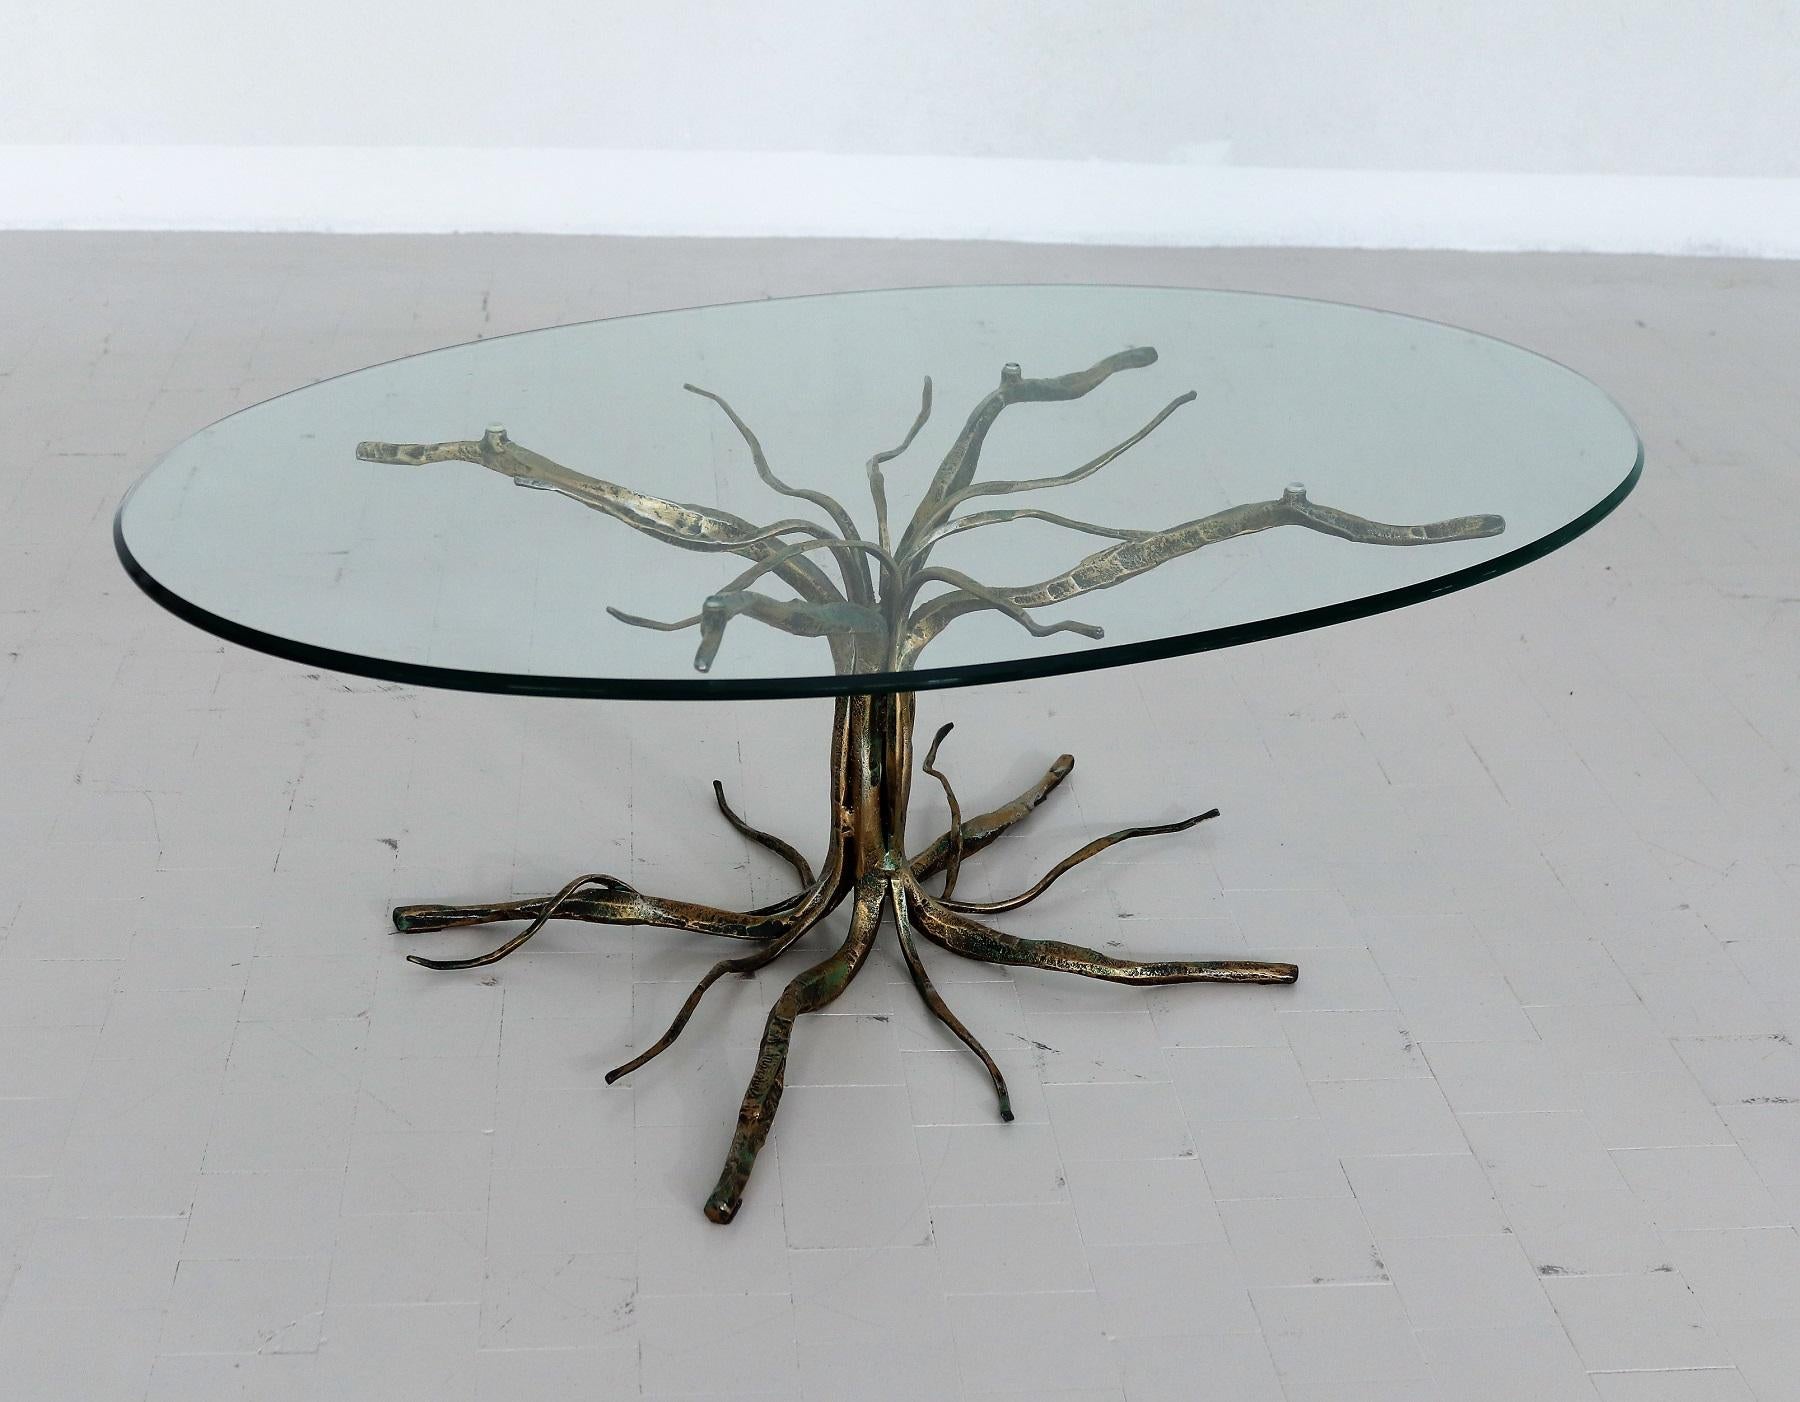 Italian Brutalist Coffee Table in Tree Shape by Salvino Marsura 1960s For Sale 9